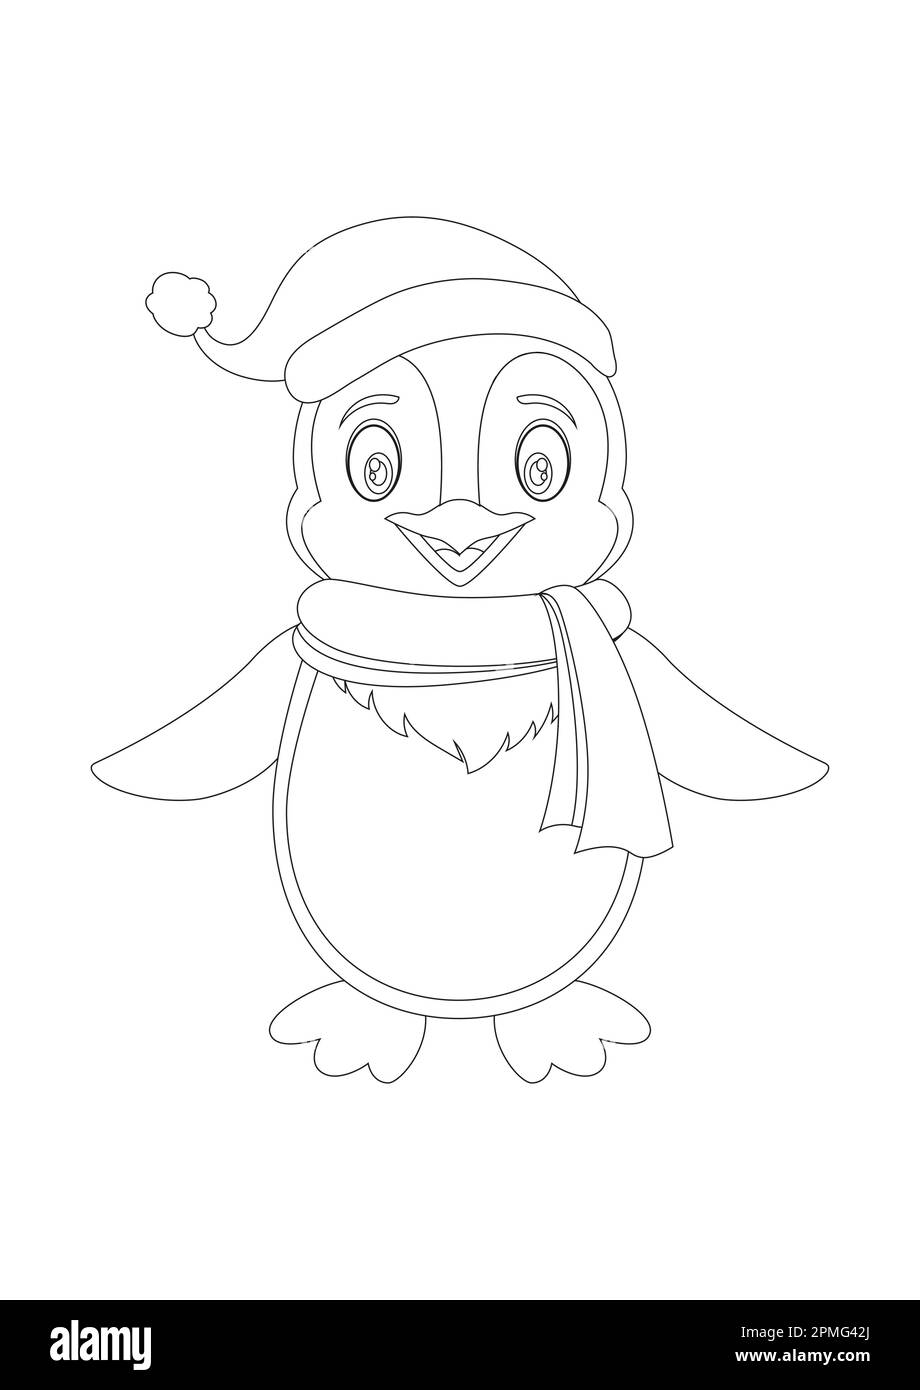 Black And White Cute Penguin Cartoon Character. Coloring Page Of Cartoon Penguin Stock Vector